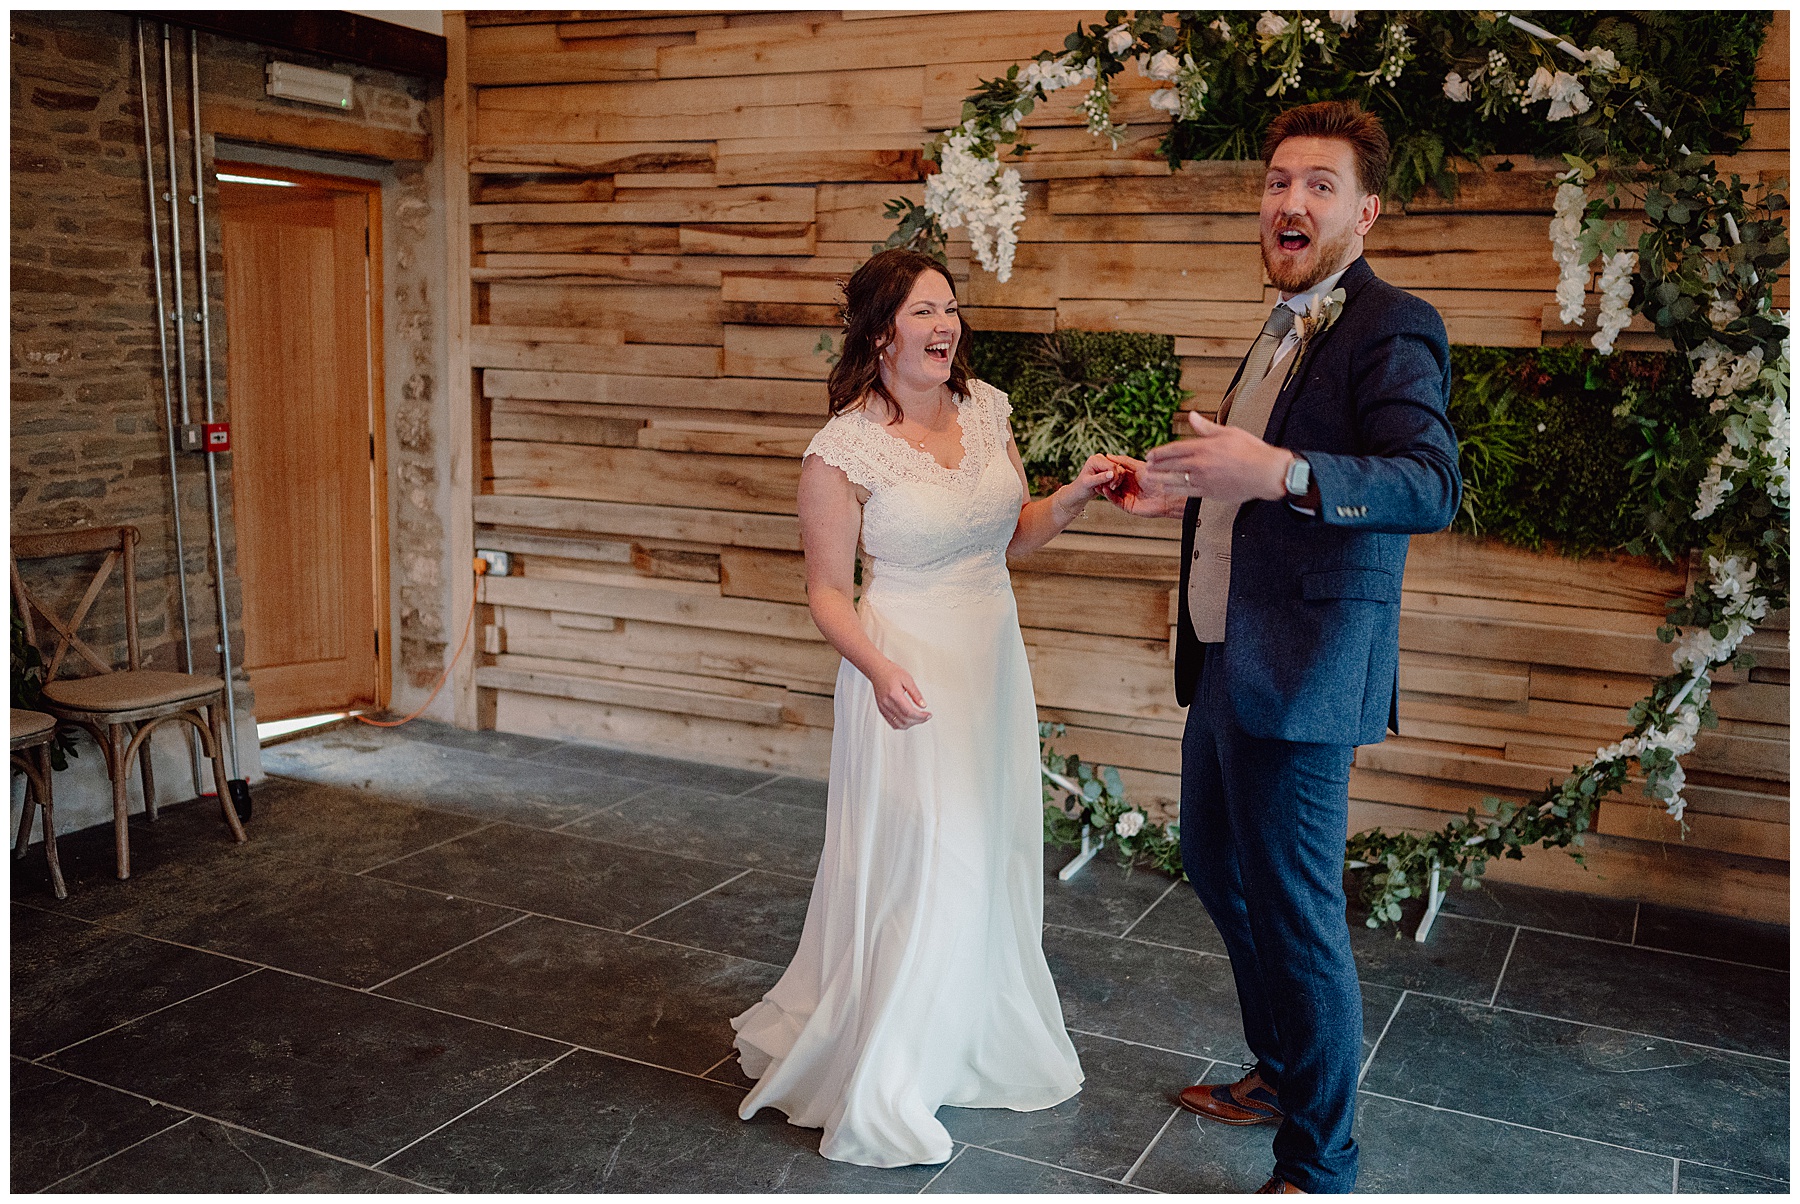 First Dance at Courtyard Wales Wedding